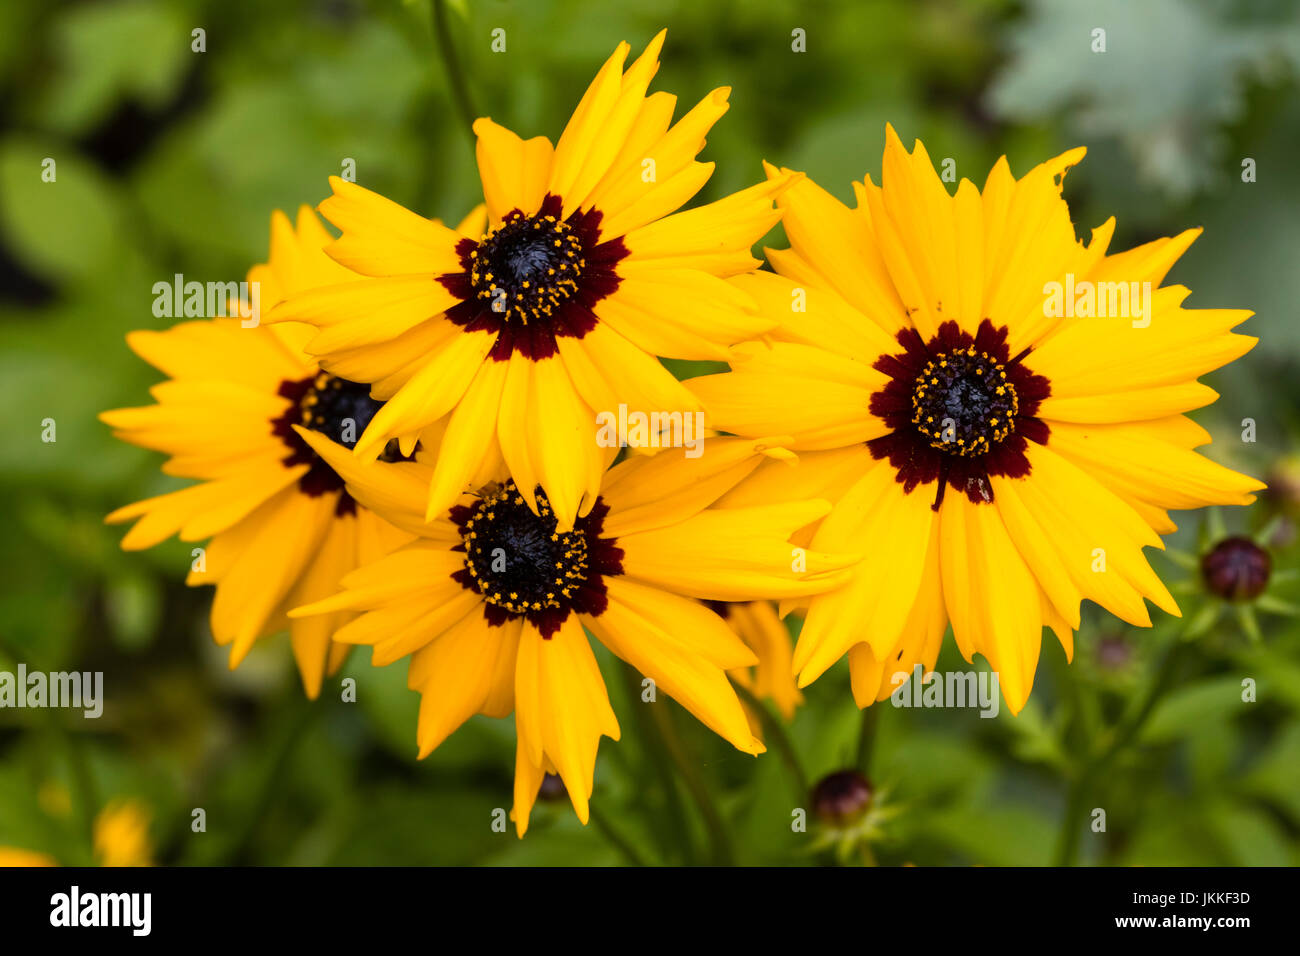 Golden yellow ray petals surround a dark centre in the annual flower, Coreopsis basalis, Golden Wave tickseed Stock Photo